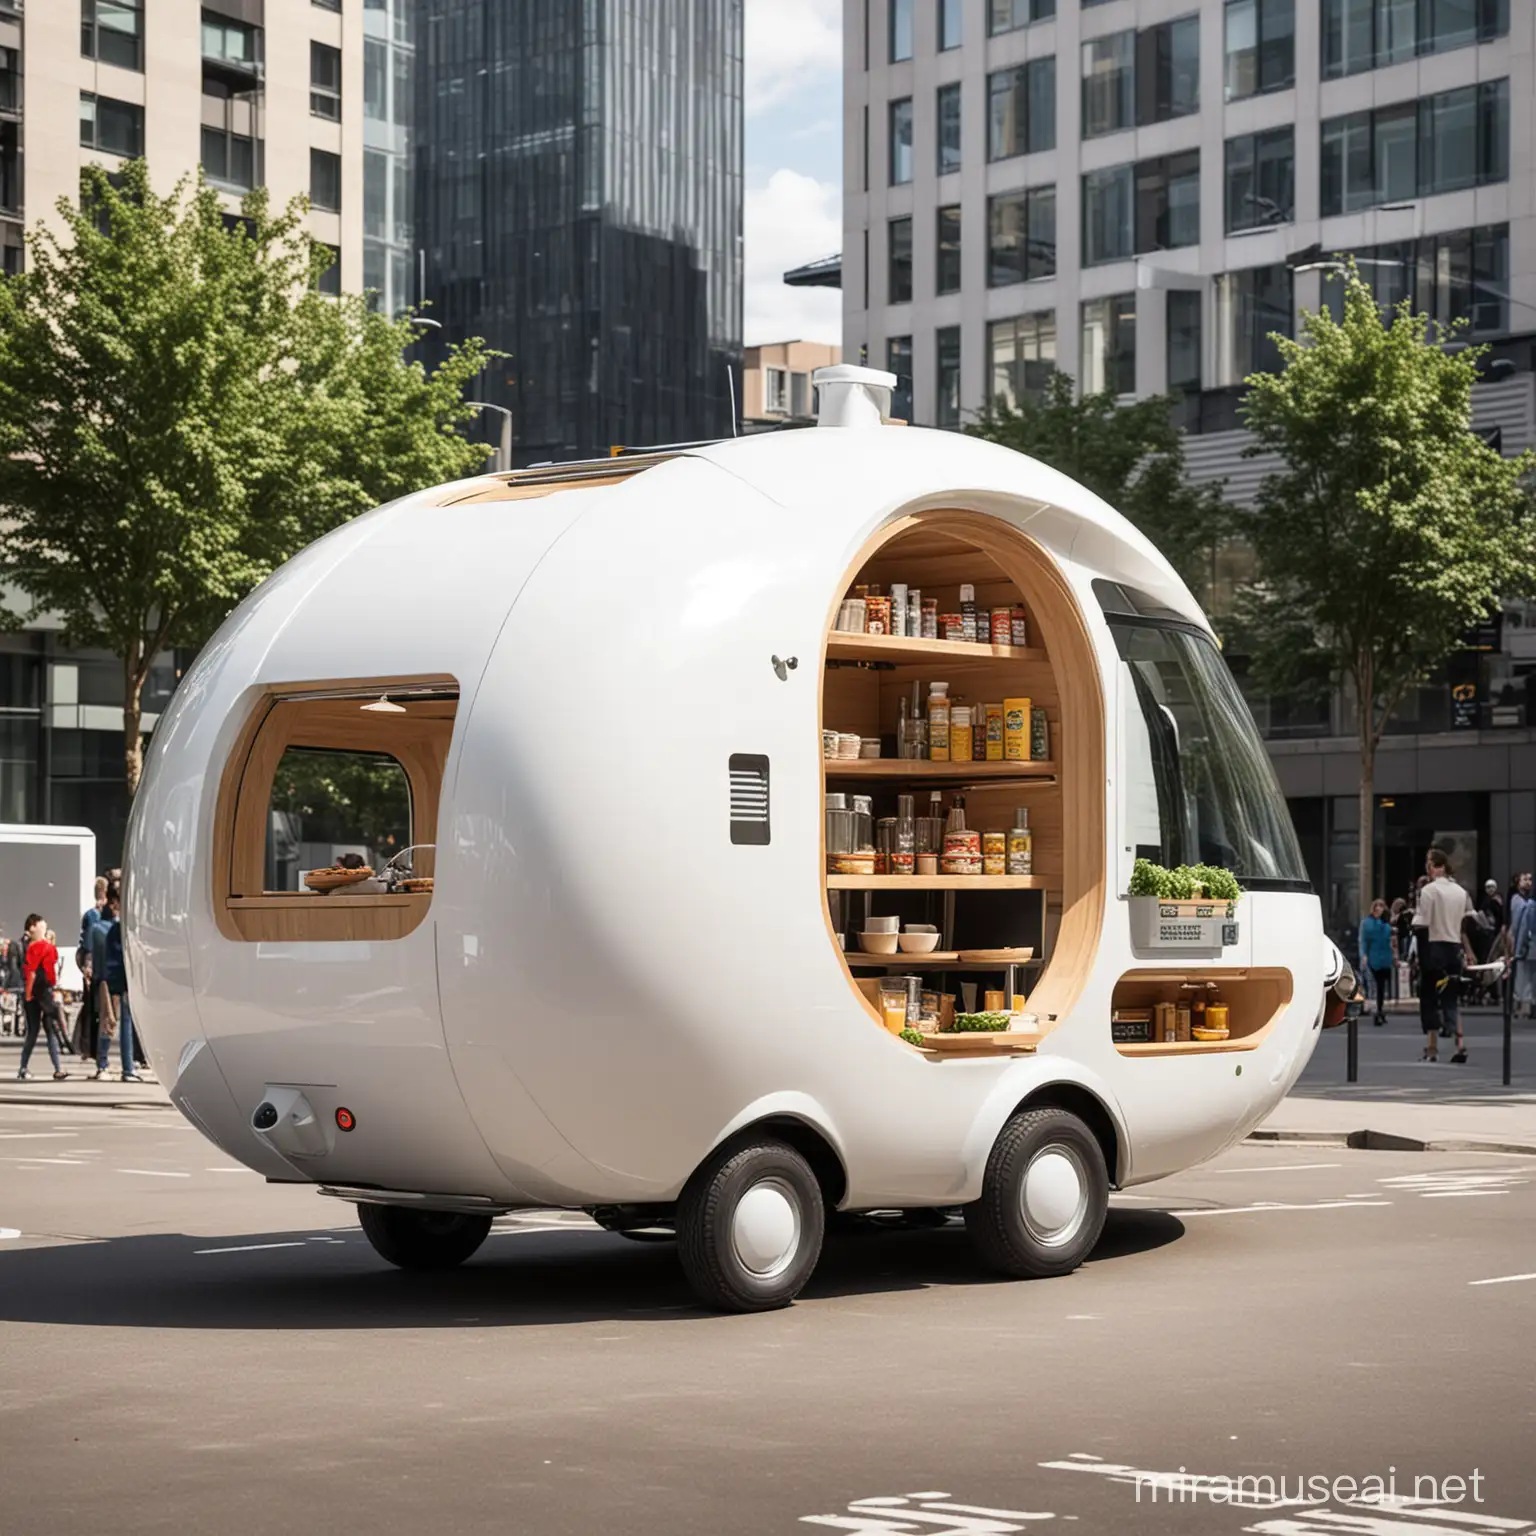 Innovative Compact Mobile Food Pod for Urban Environments